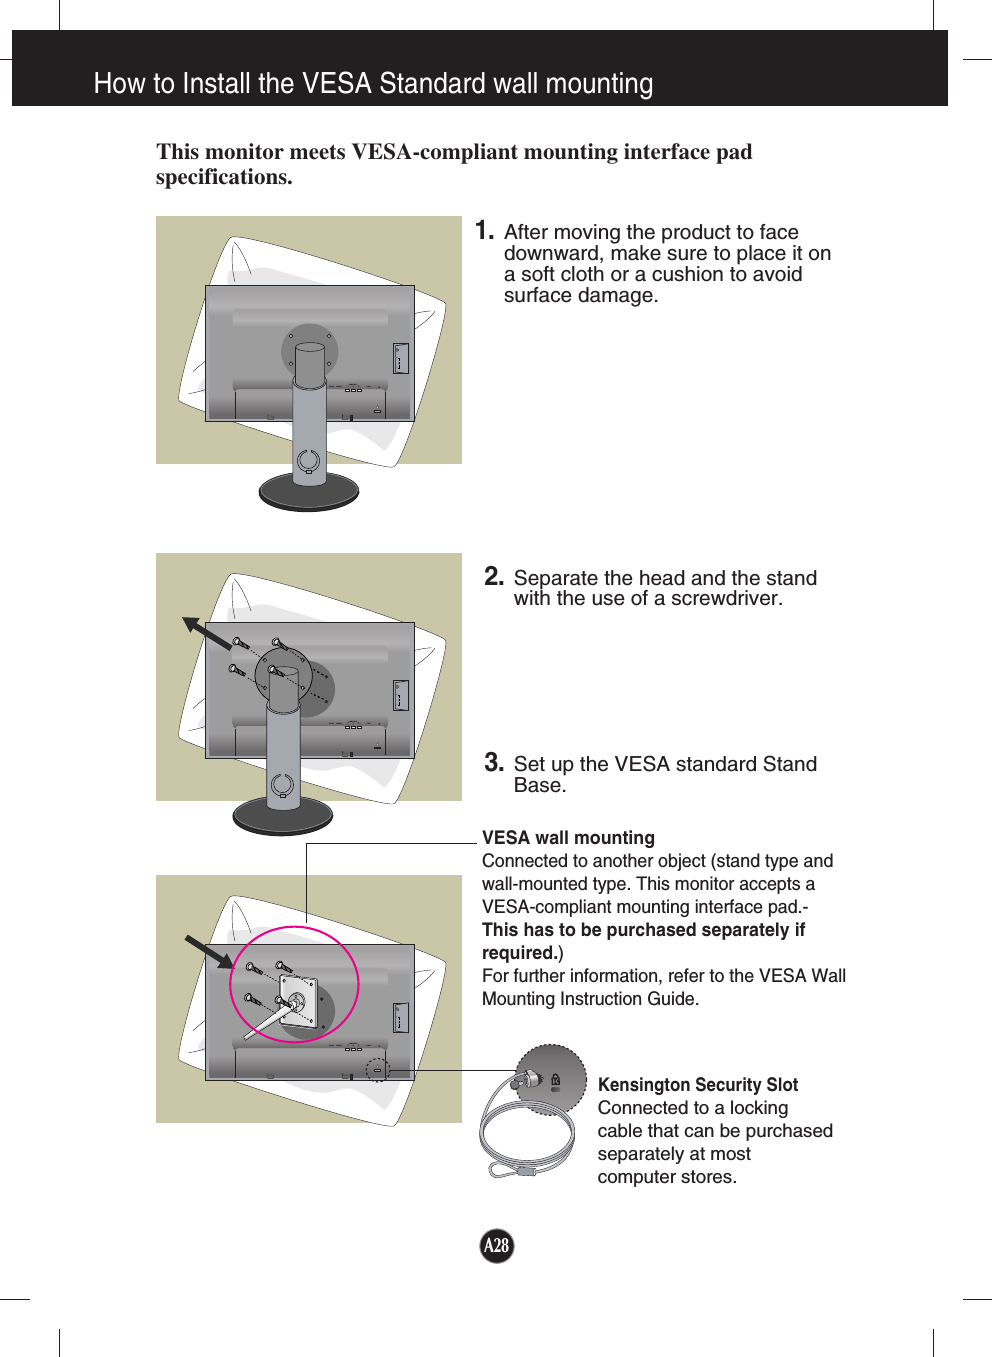 A28How to Install the VESA Standard wall mountingThis monitor meets VESA-compliant mounting interface padspecifications.DC-OUT HDMI/DVICOMPONENTAUDIOOUTD-SUBYPRPB   1                          2DC-OUT HDMI/DVICOMPONENTAUDIOOUTD-SUBYPRPB   1                          2DC-OUT HDMI/DVICOMPONENTAUDIOOUTD-SUBYPRPB   1                          2VESA wall mountingConnected to another object (stand type andwall-mounted type. This monitor accepts aVESA-compliant mounting interface pad.-This has to be purchased separately ifrequired.)For further information, refer to the VESA WallMounting Instruction Guide.Kensington Security SlotConnected to a locking cable that can be purchasedseparately at most computer stores.1.After moving the product to facedownward, make sure to place it ona soft cloth or a cushion to avoidsurface damage.  2. Separate the head and the standwith the use of a screwdriver.3.Set up the VESA standard StandBase.